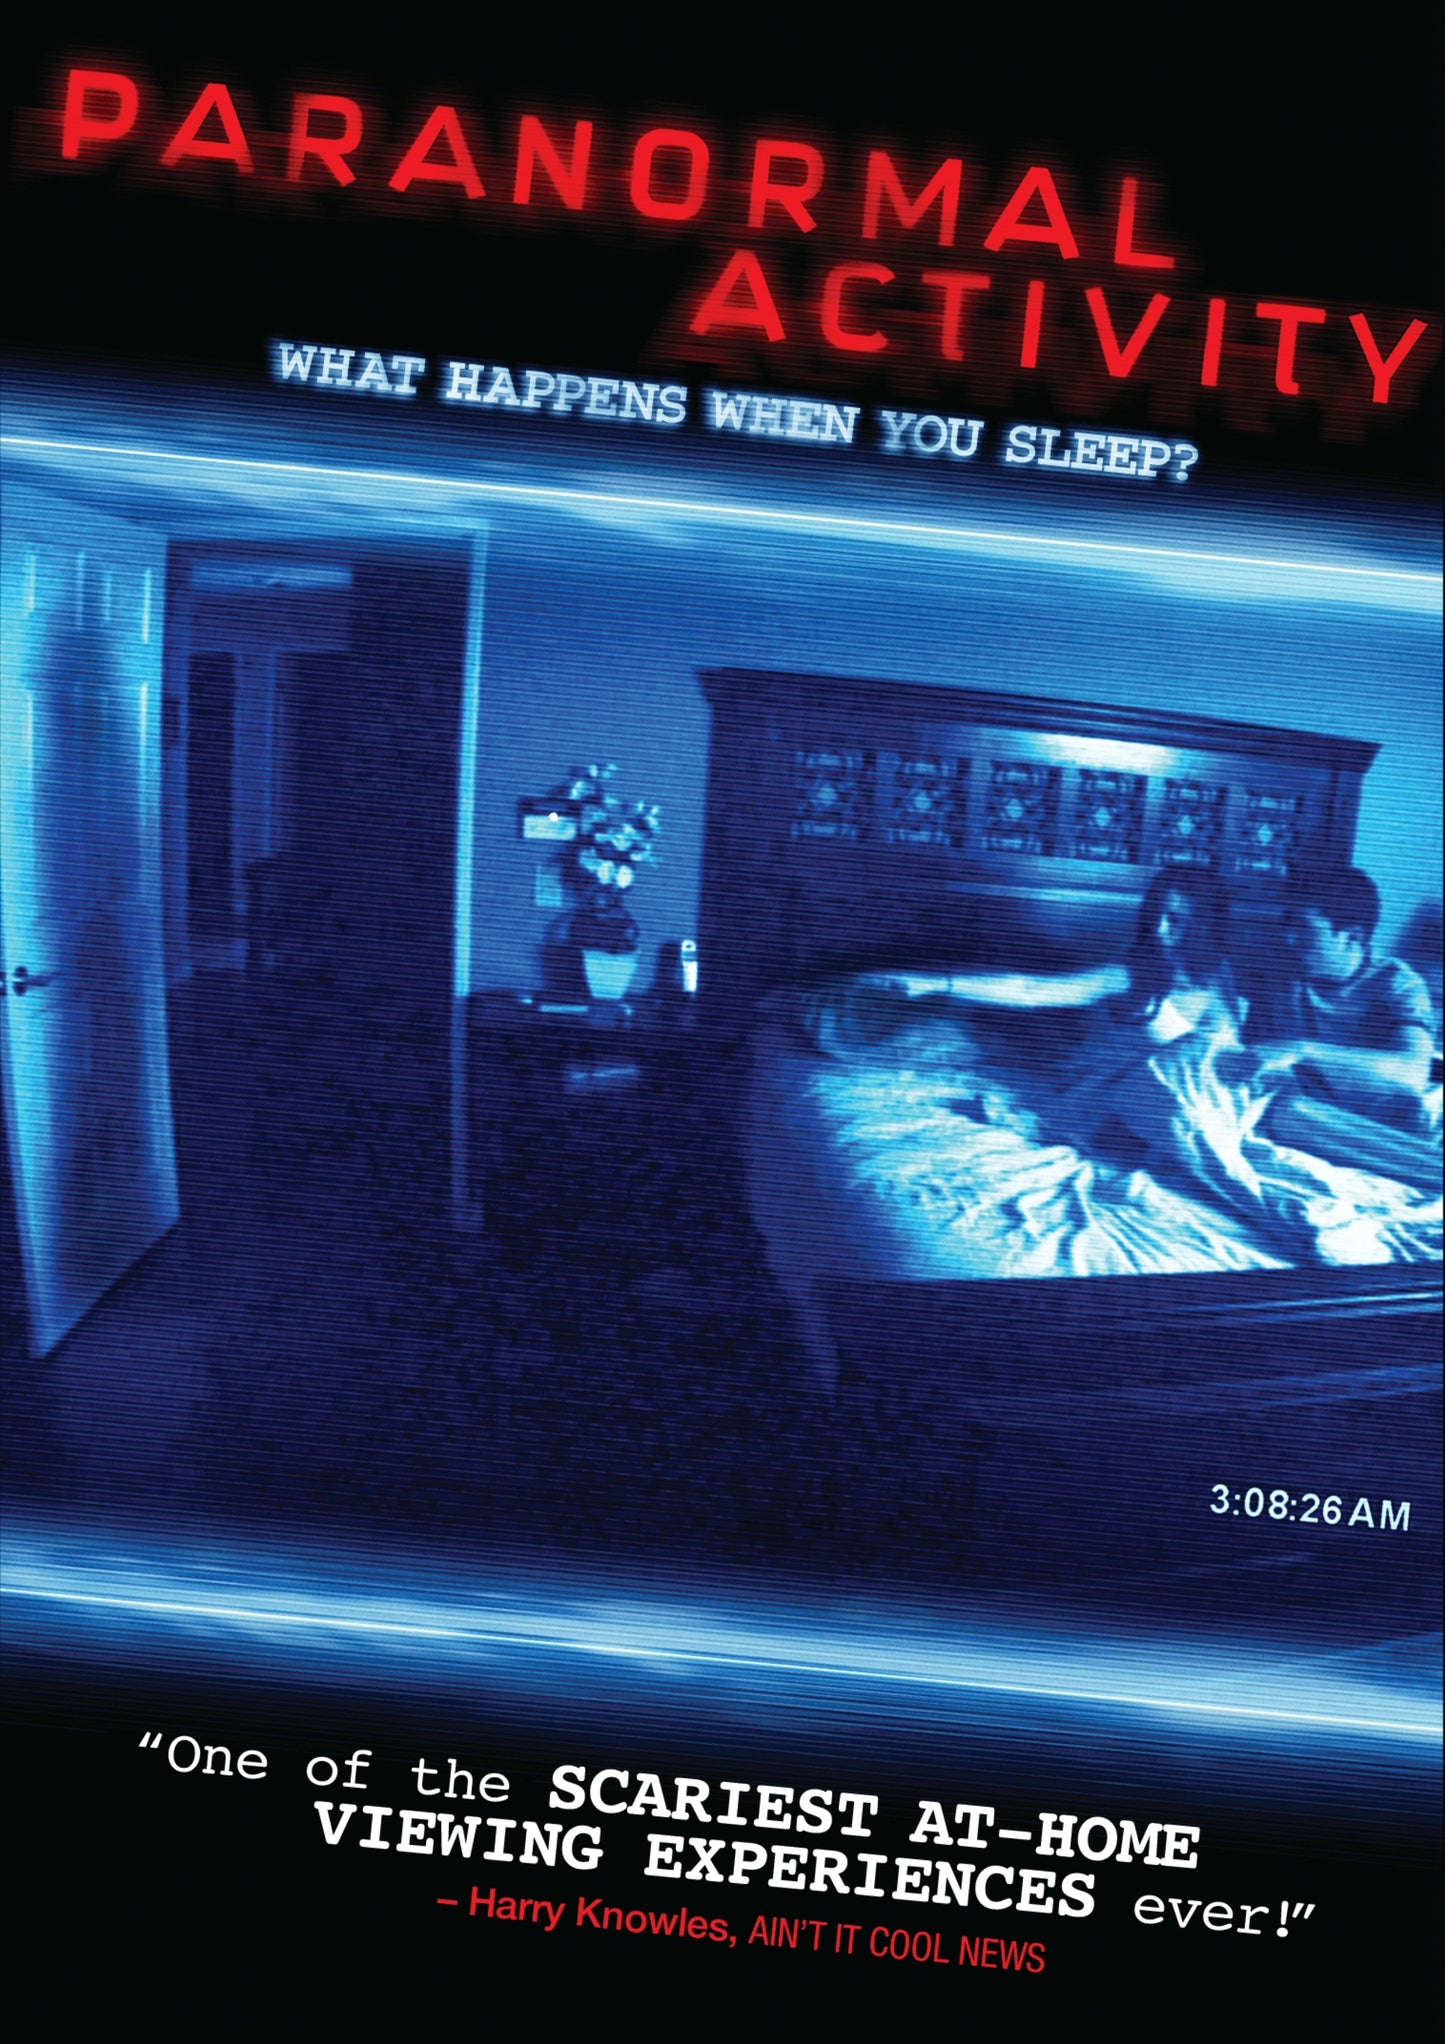 Paranormal Activity cover art